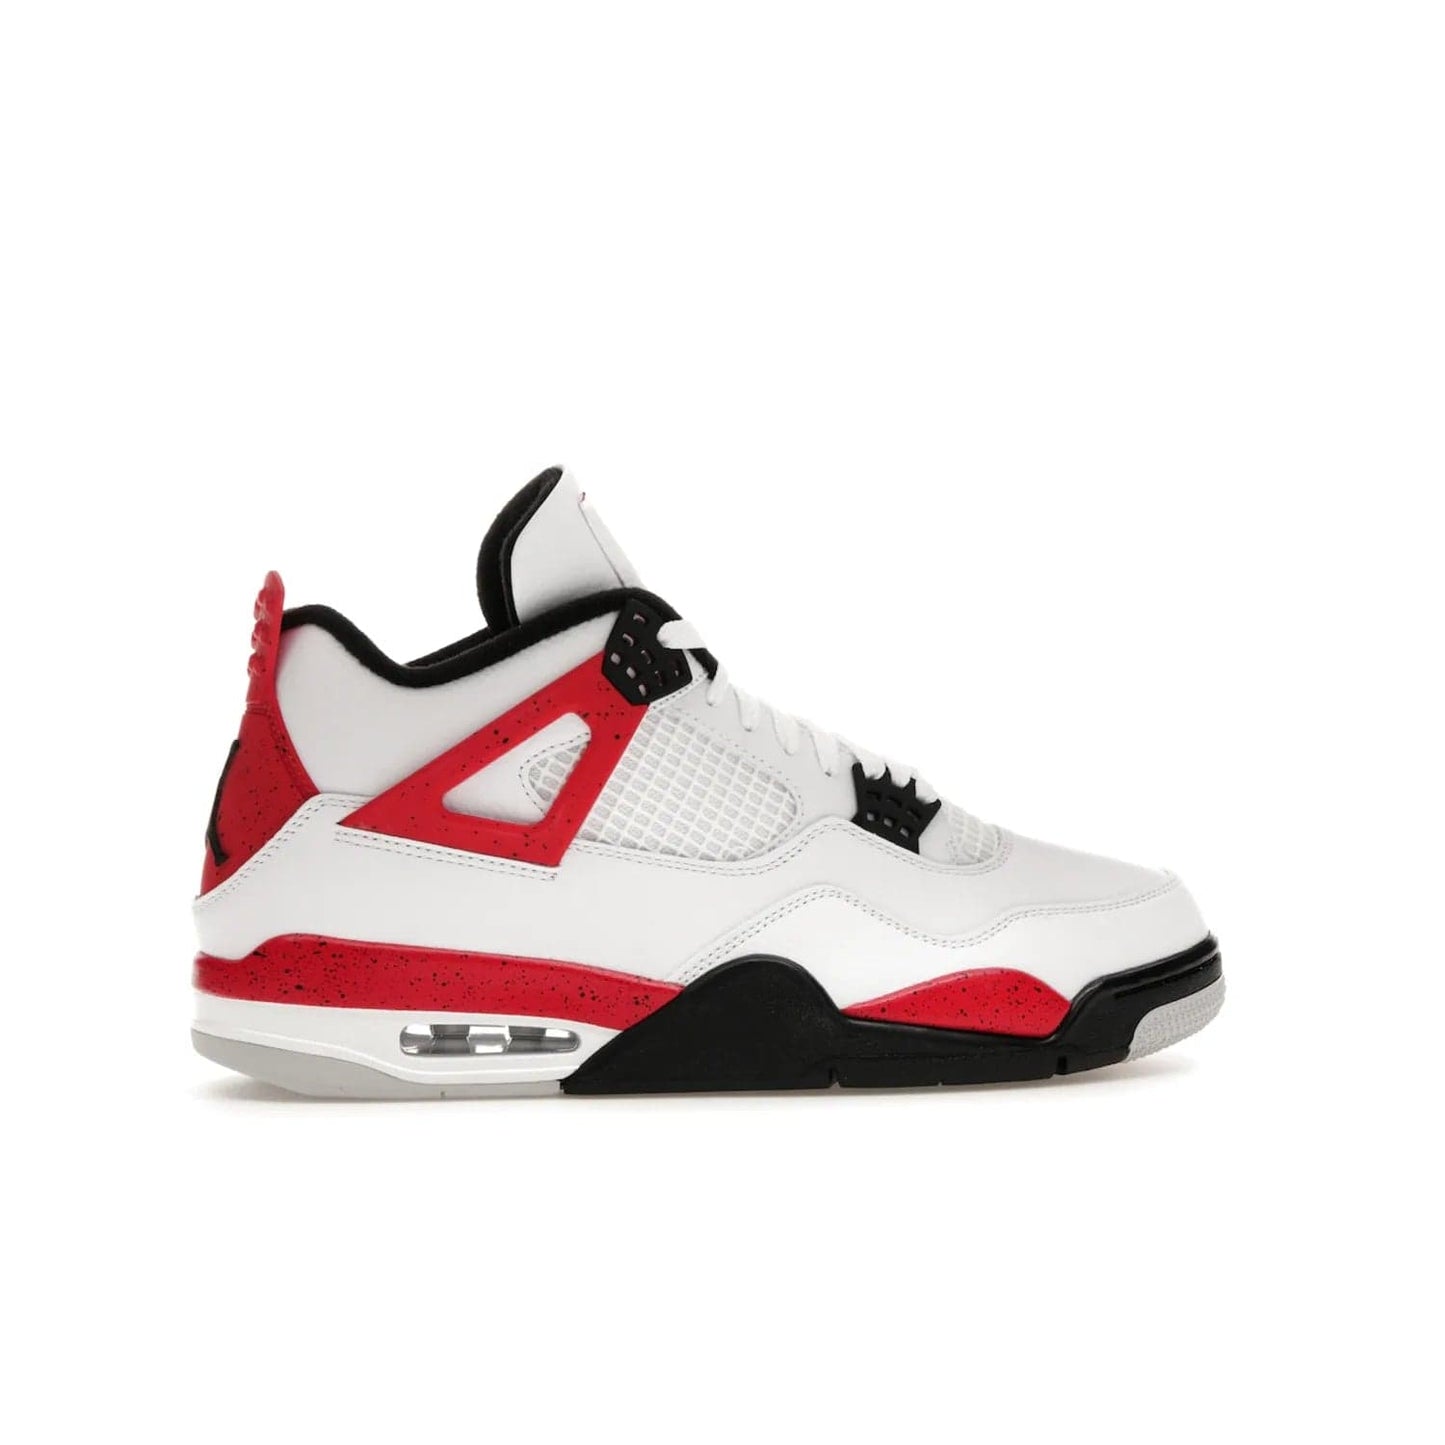 Jordan 4 Retro Red Cement - Image 36 - Only at www.BallersClubKickz.com - Iconic Jordan silhouette with a unique twist. White premium leather uppers with fire red and black detailing. Black, white, and fire red midsole with mesh detailing and Jumpman logo. Jordan 4 Retro Red Cement released with premium price.